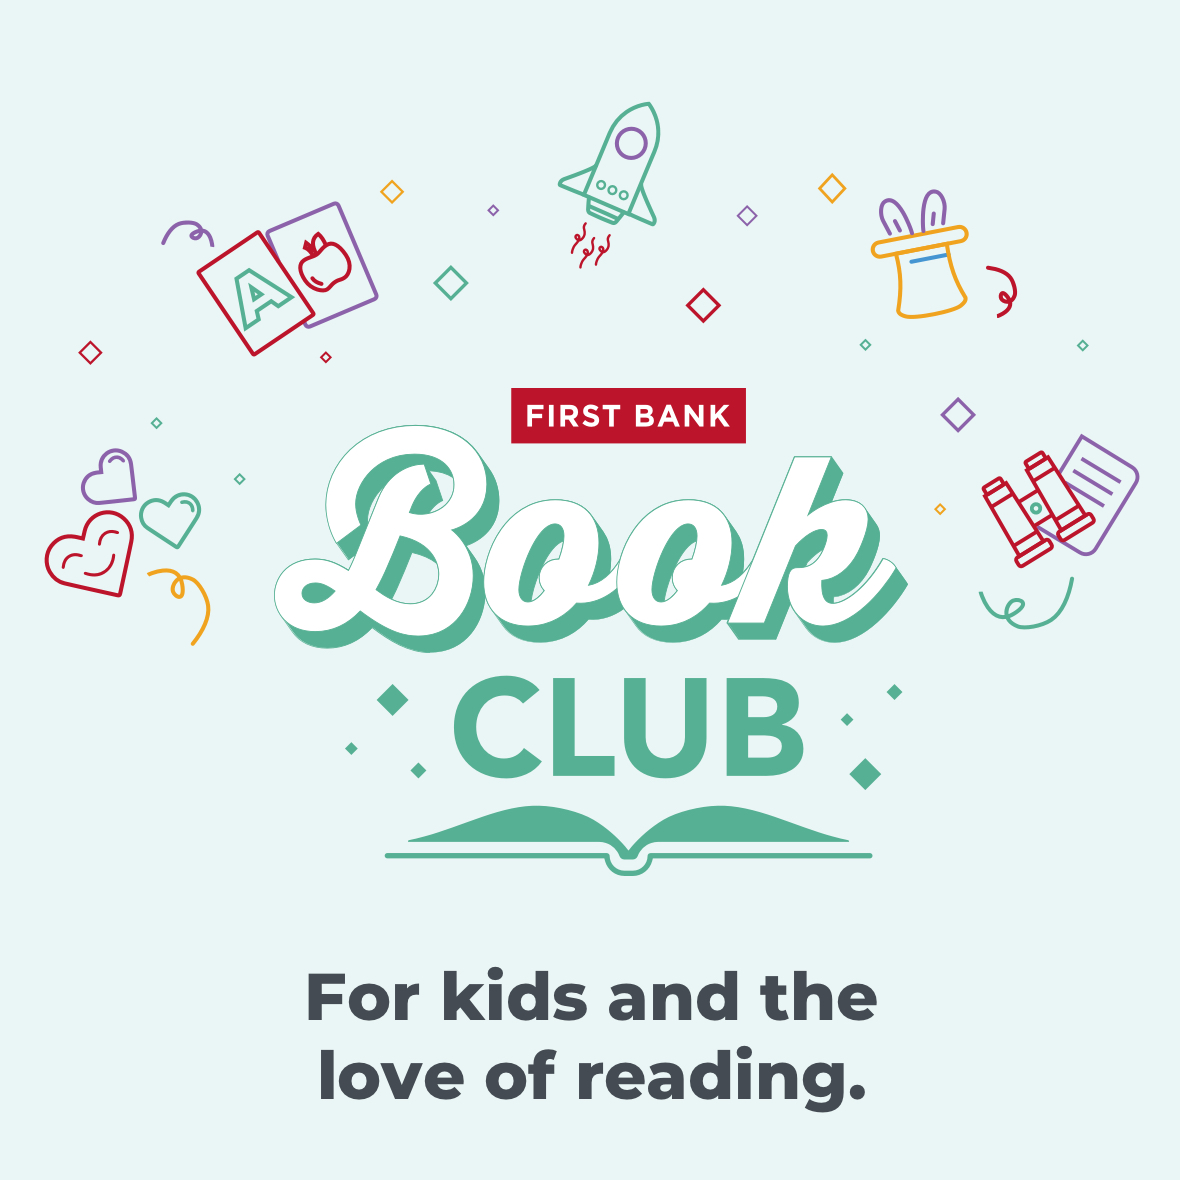 Book Club. For kids and the love of reading.